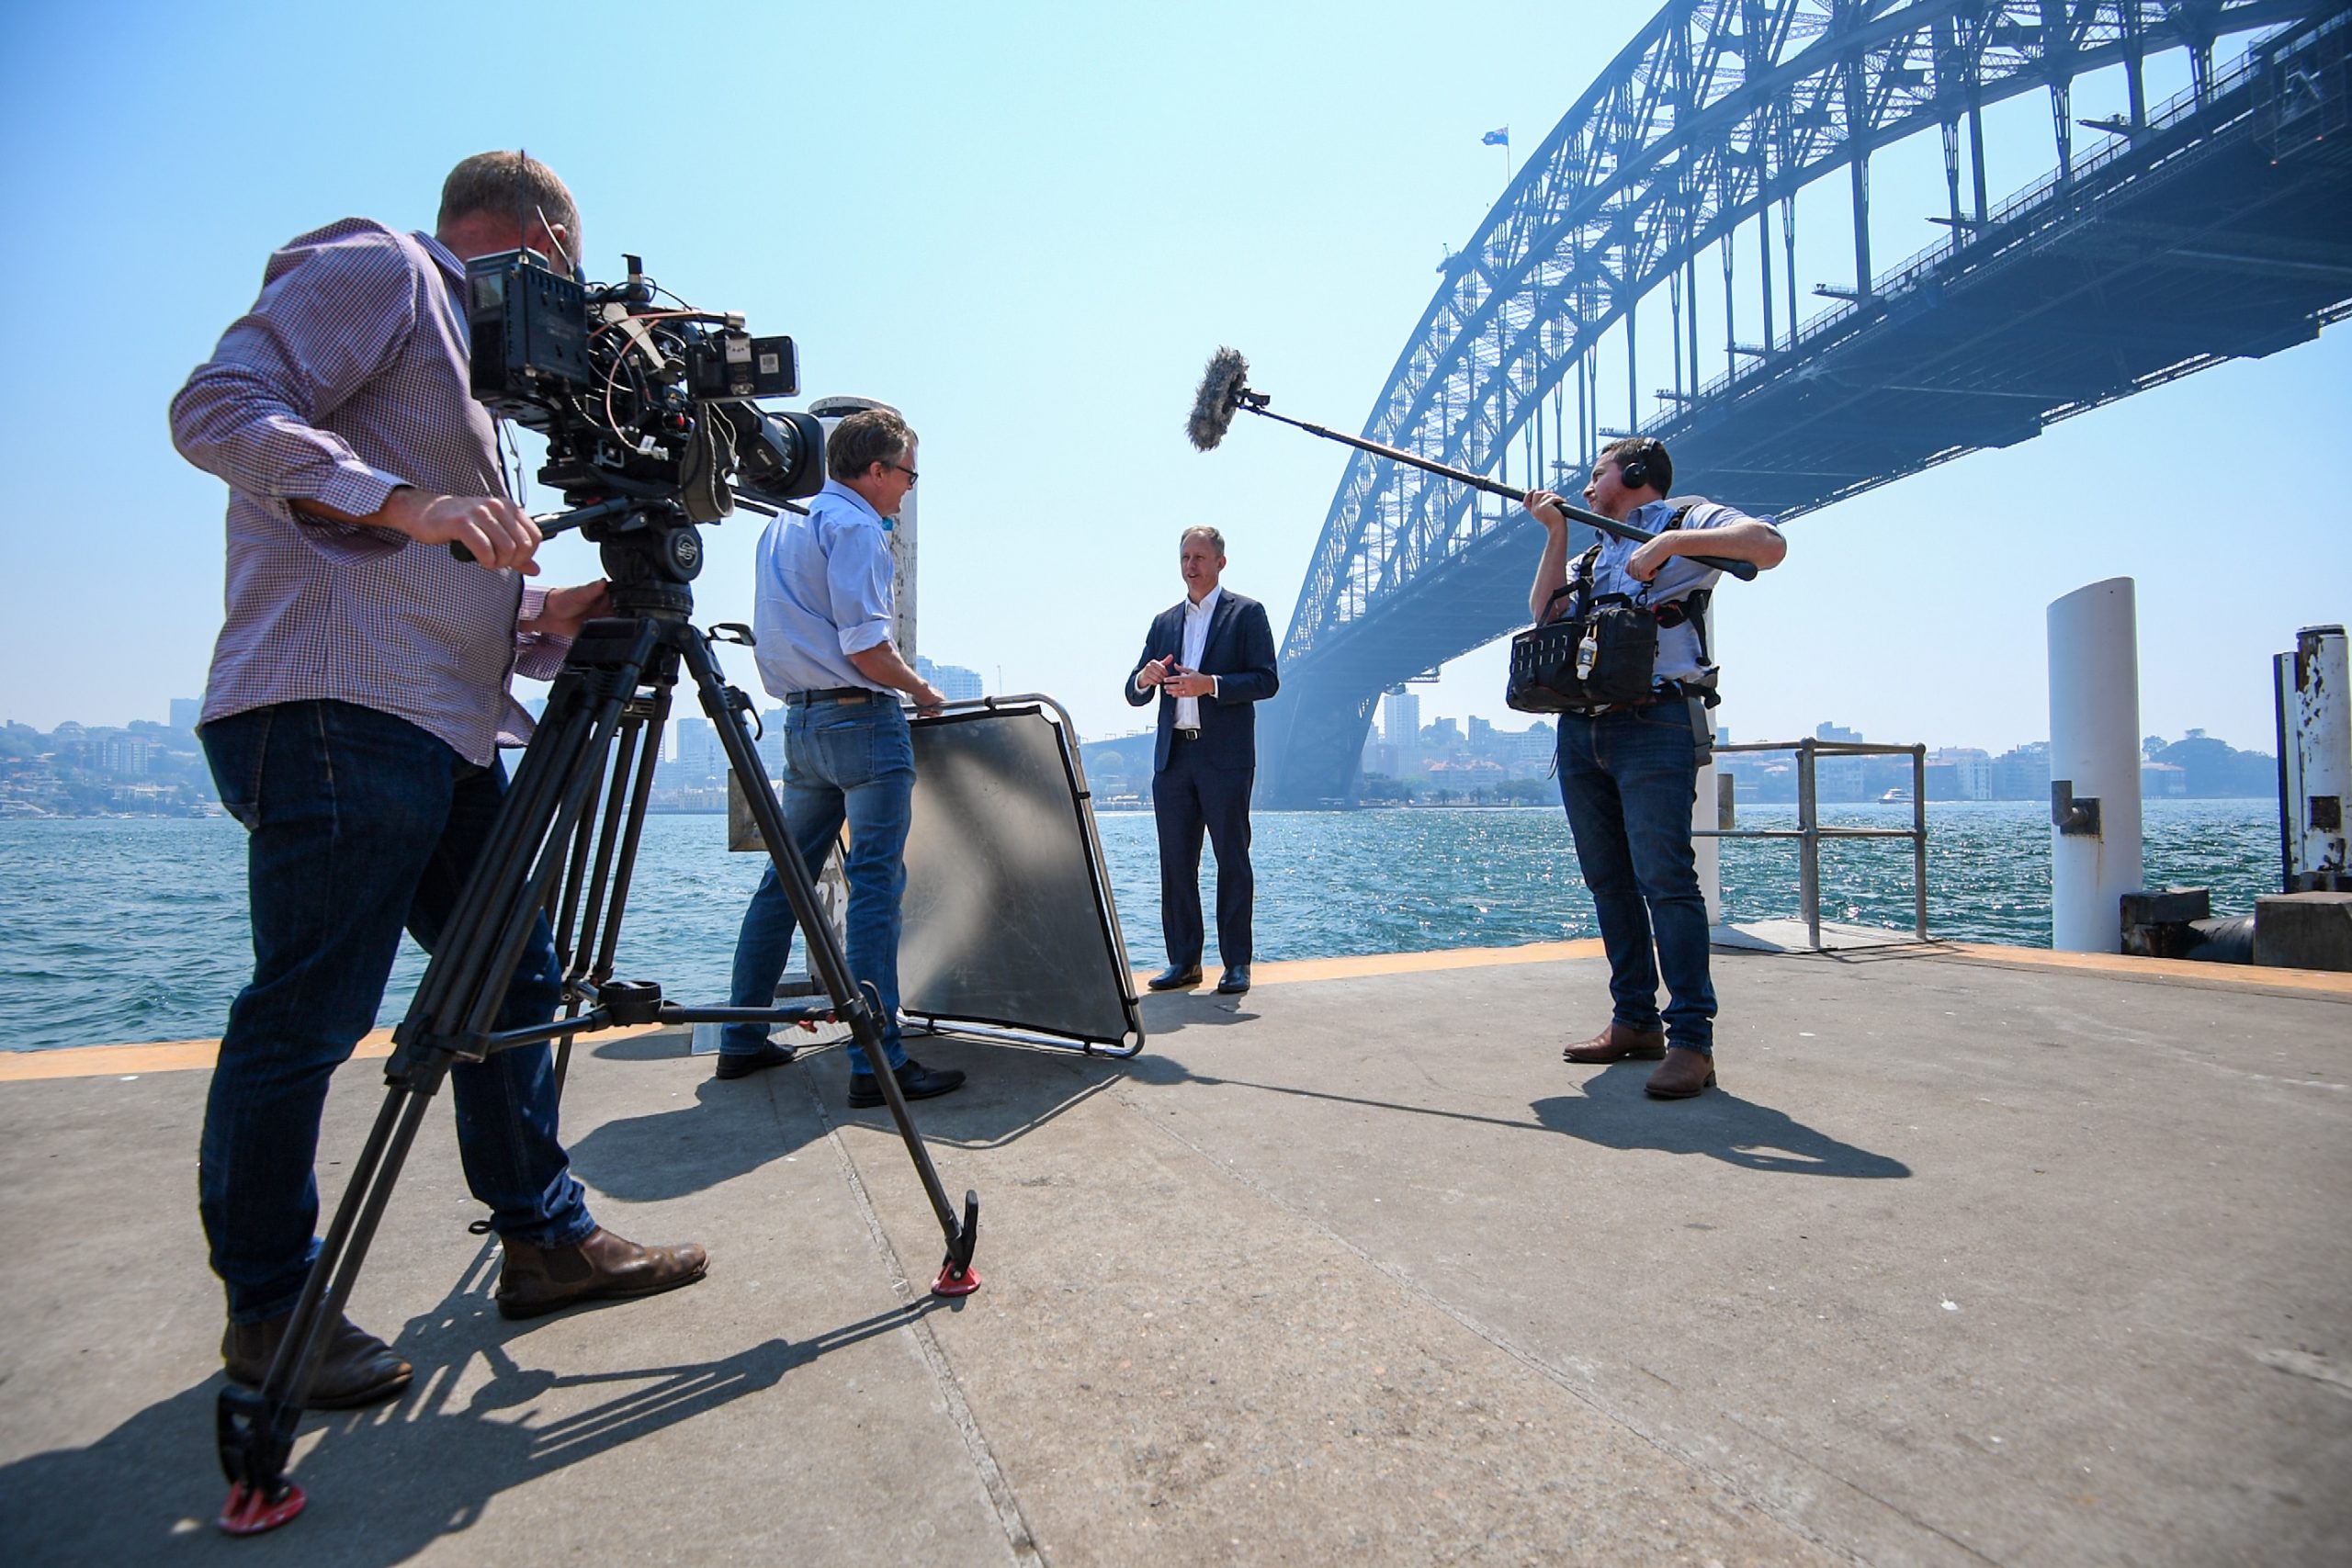 Secretary of Transport for NSW, Rodd Staples, is filmed at the offices of Transport for NSW for a documentary on the building of the Sydney Metro.